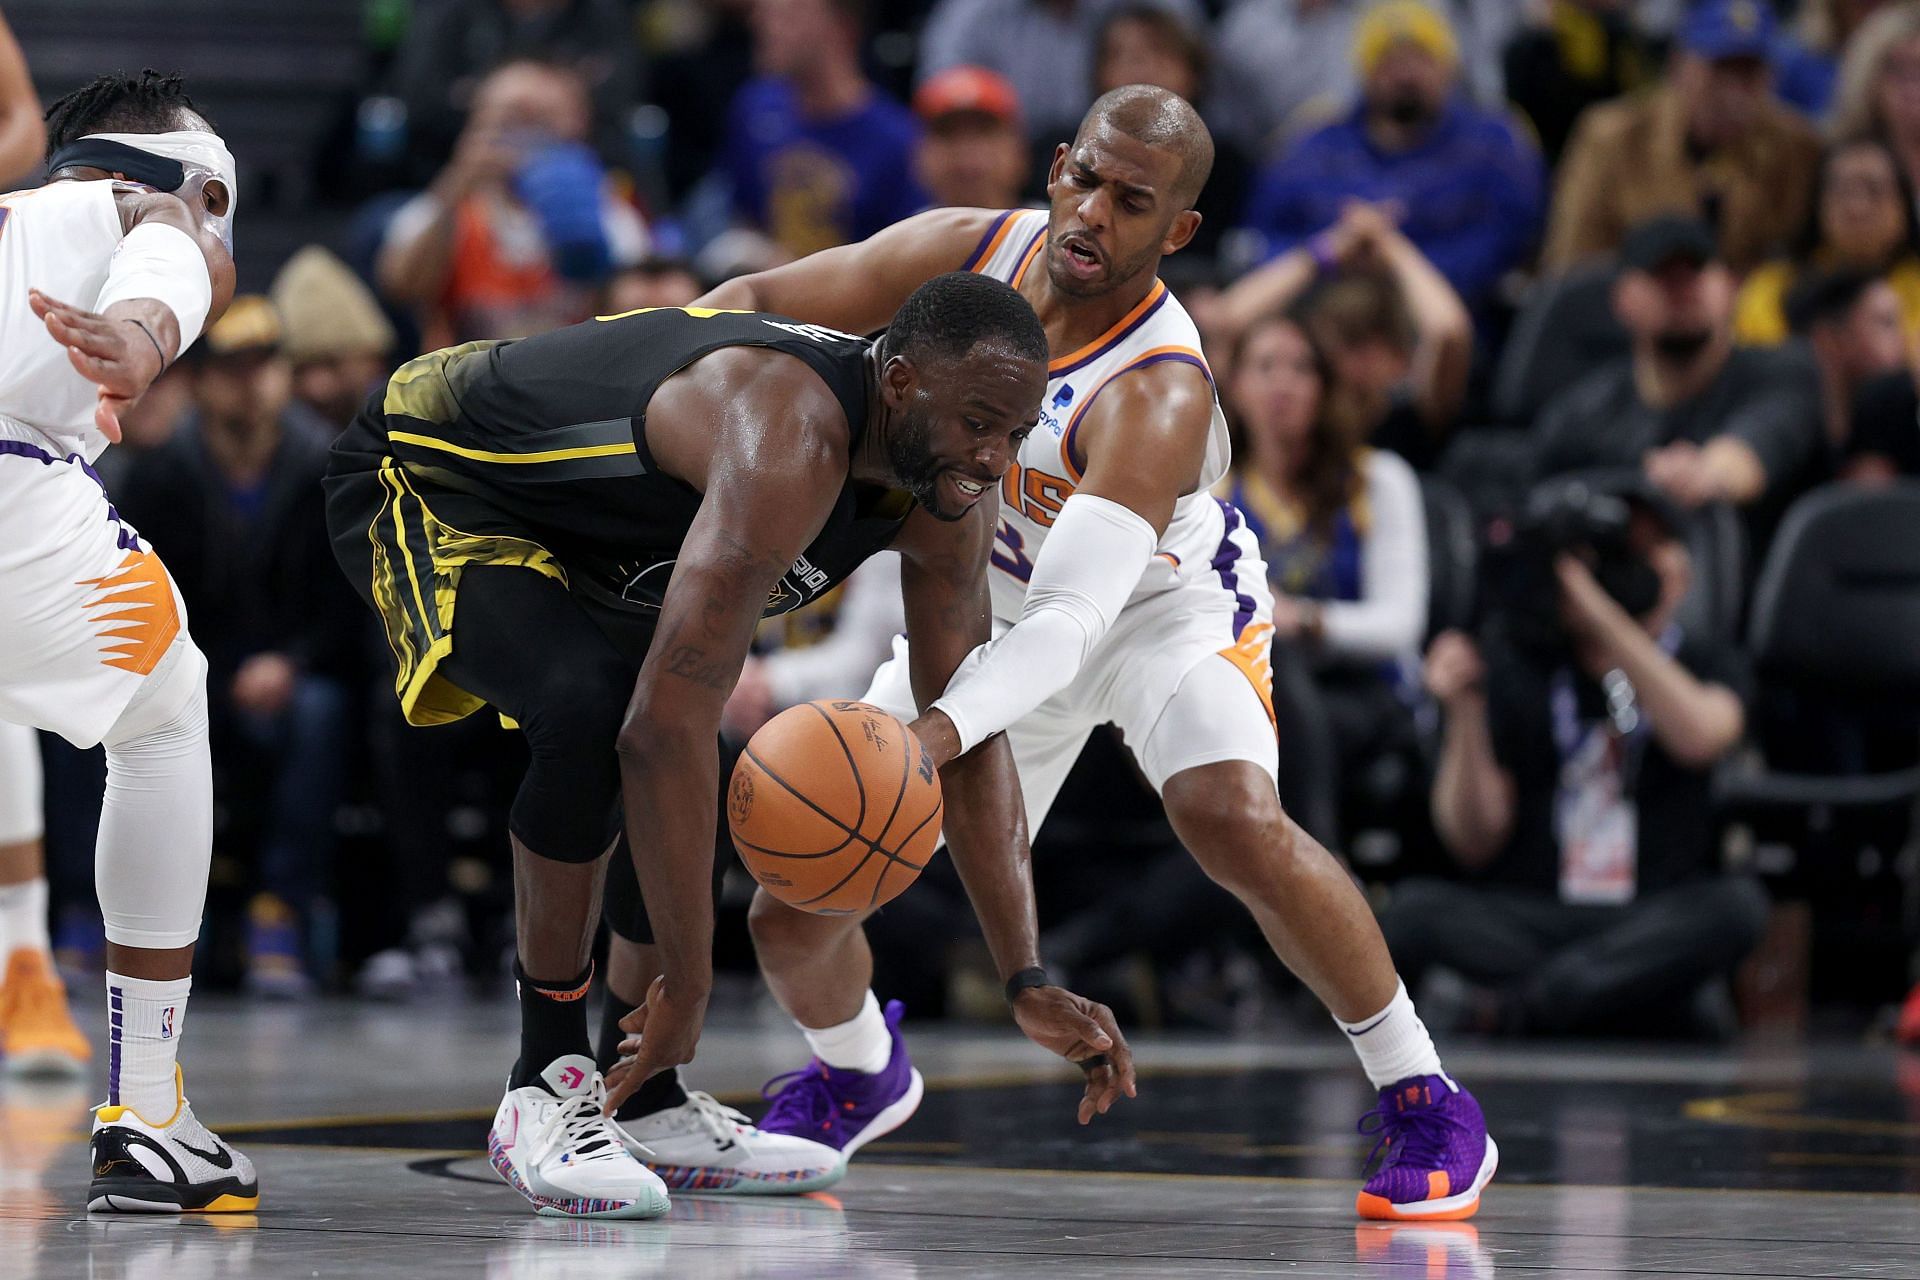 Draymond Green: If you've ever watched Chris Paul compete, he's